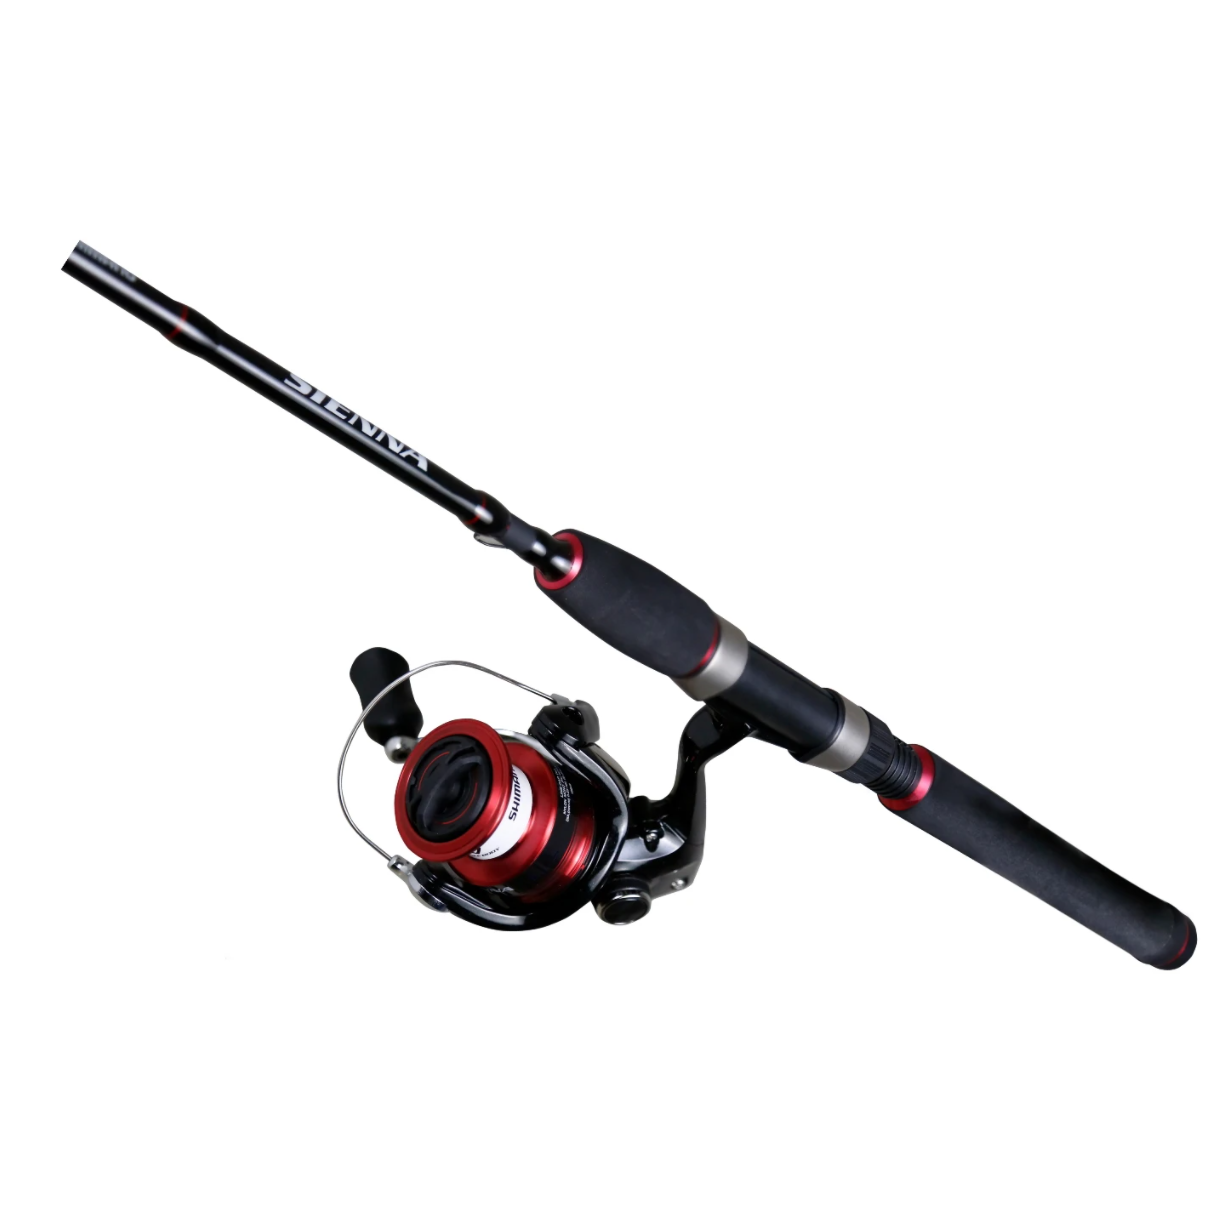 NEW Shimano Sienna SNC3000FG Spinning Reel C3000 RED BLACK WALLEY BASS ROD